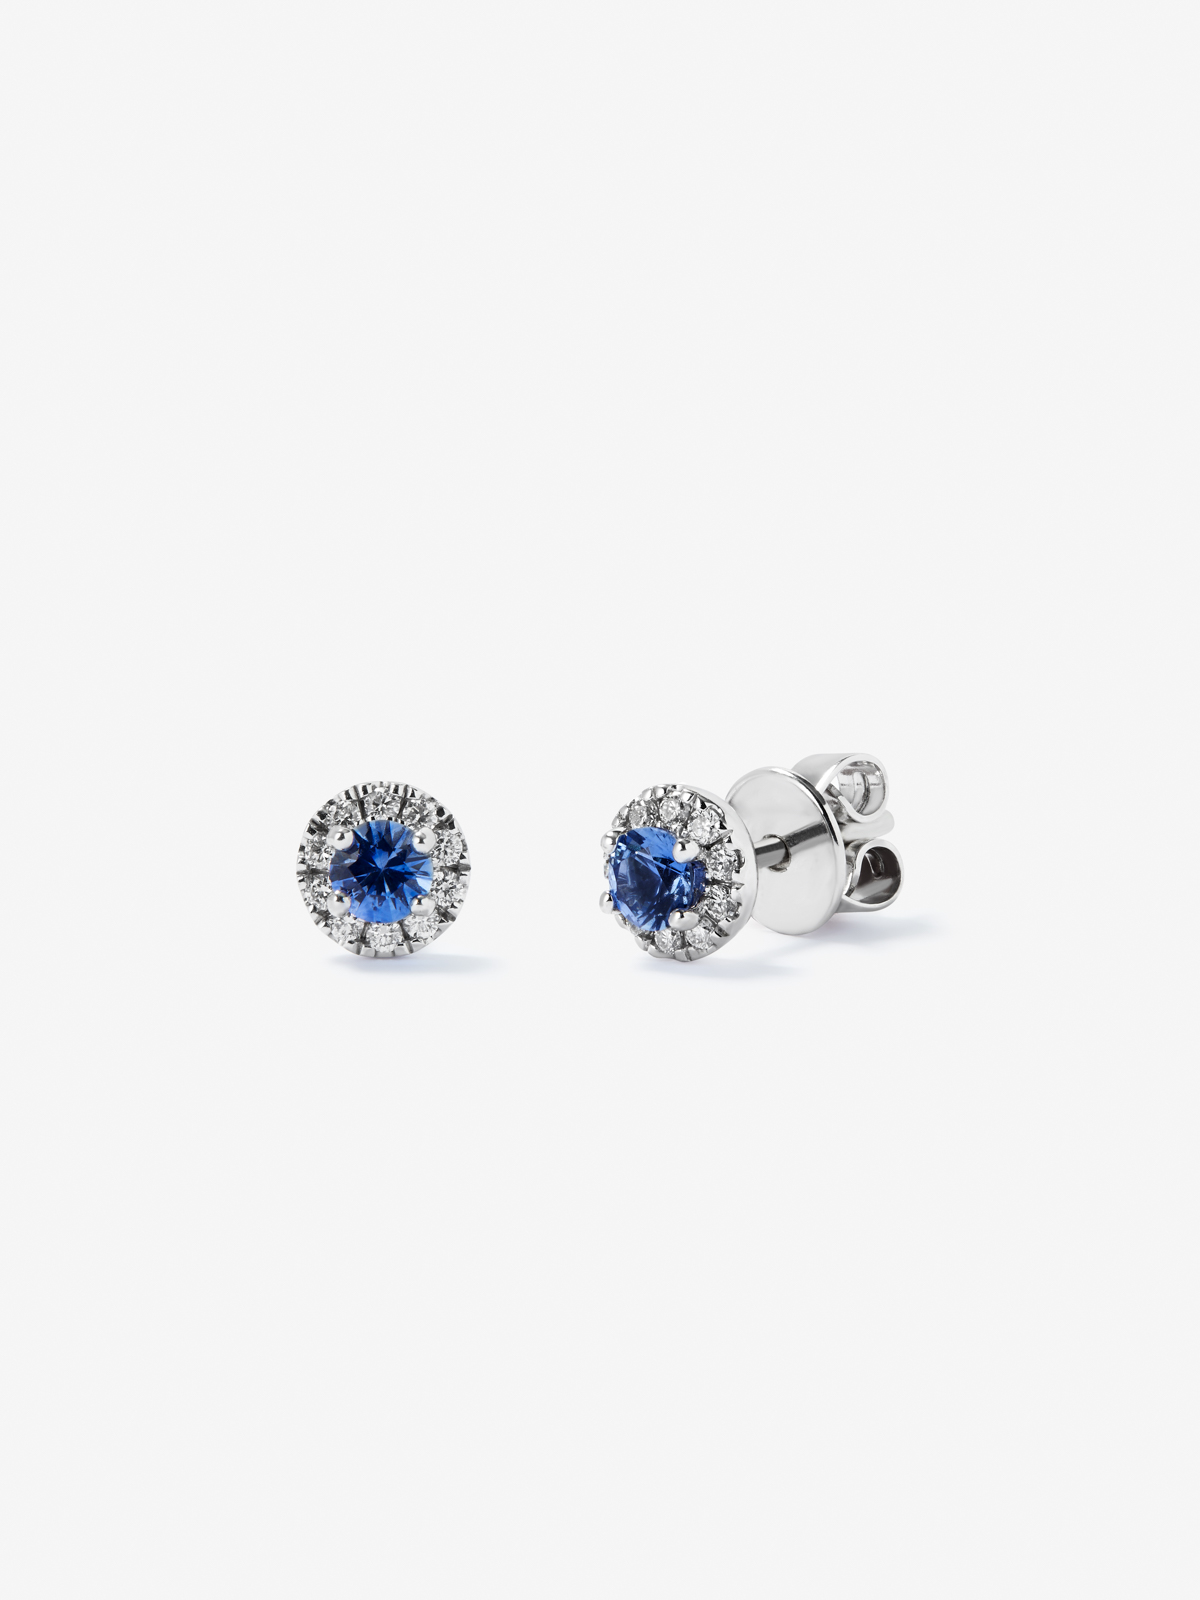 White Gold Big Three Earrings with Sapphire.